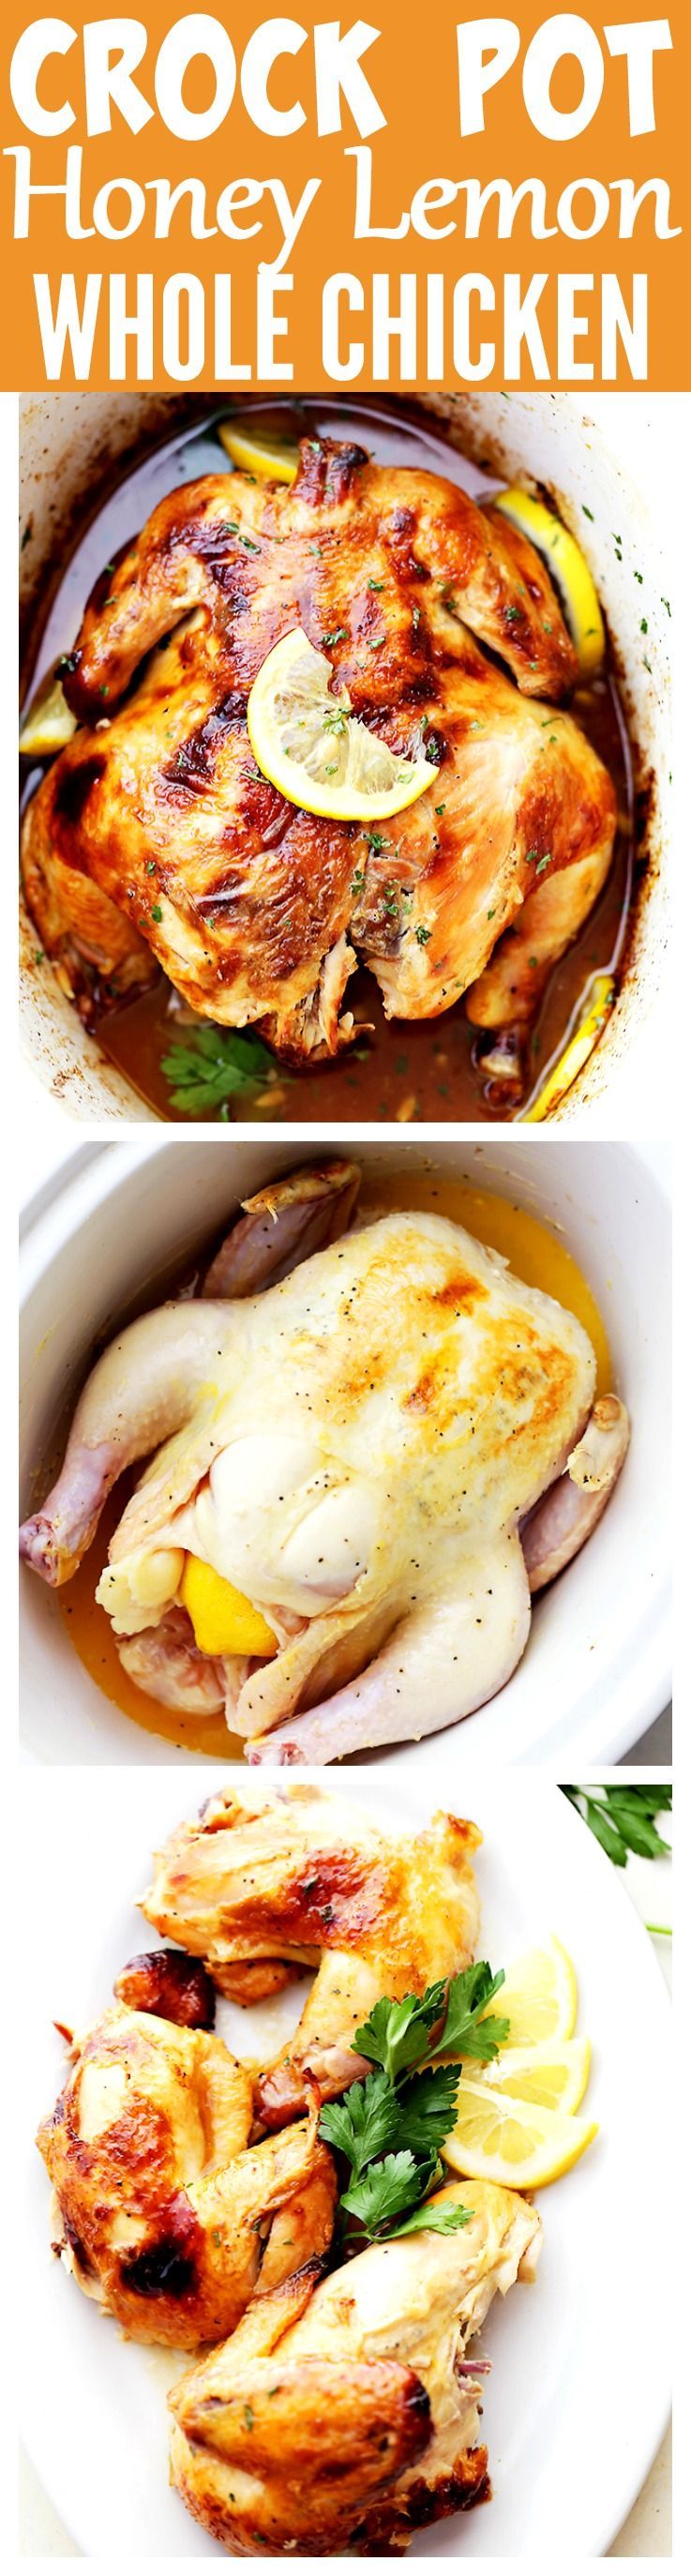 Crock Pot Honey Lemon Chicken Recipe – Rubbed with lemon-pepper butter and a sweet honey sauce, this i